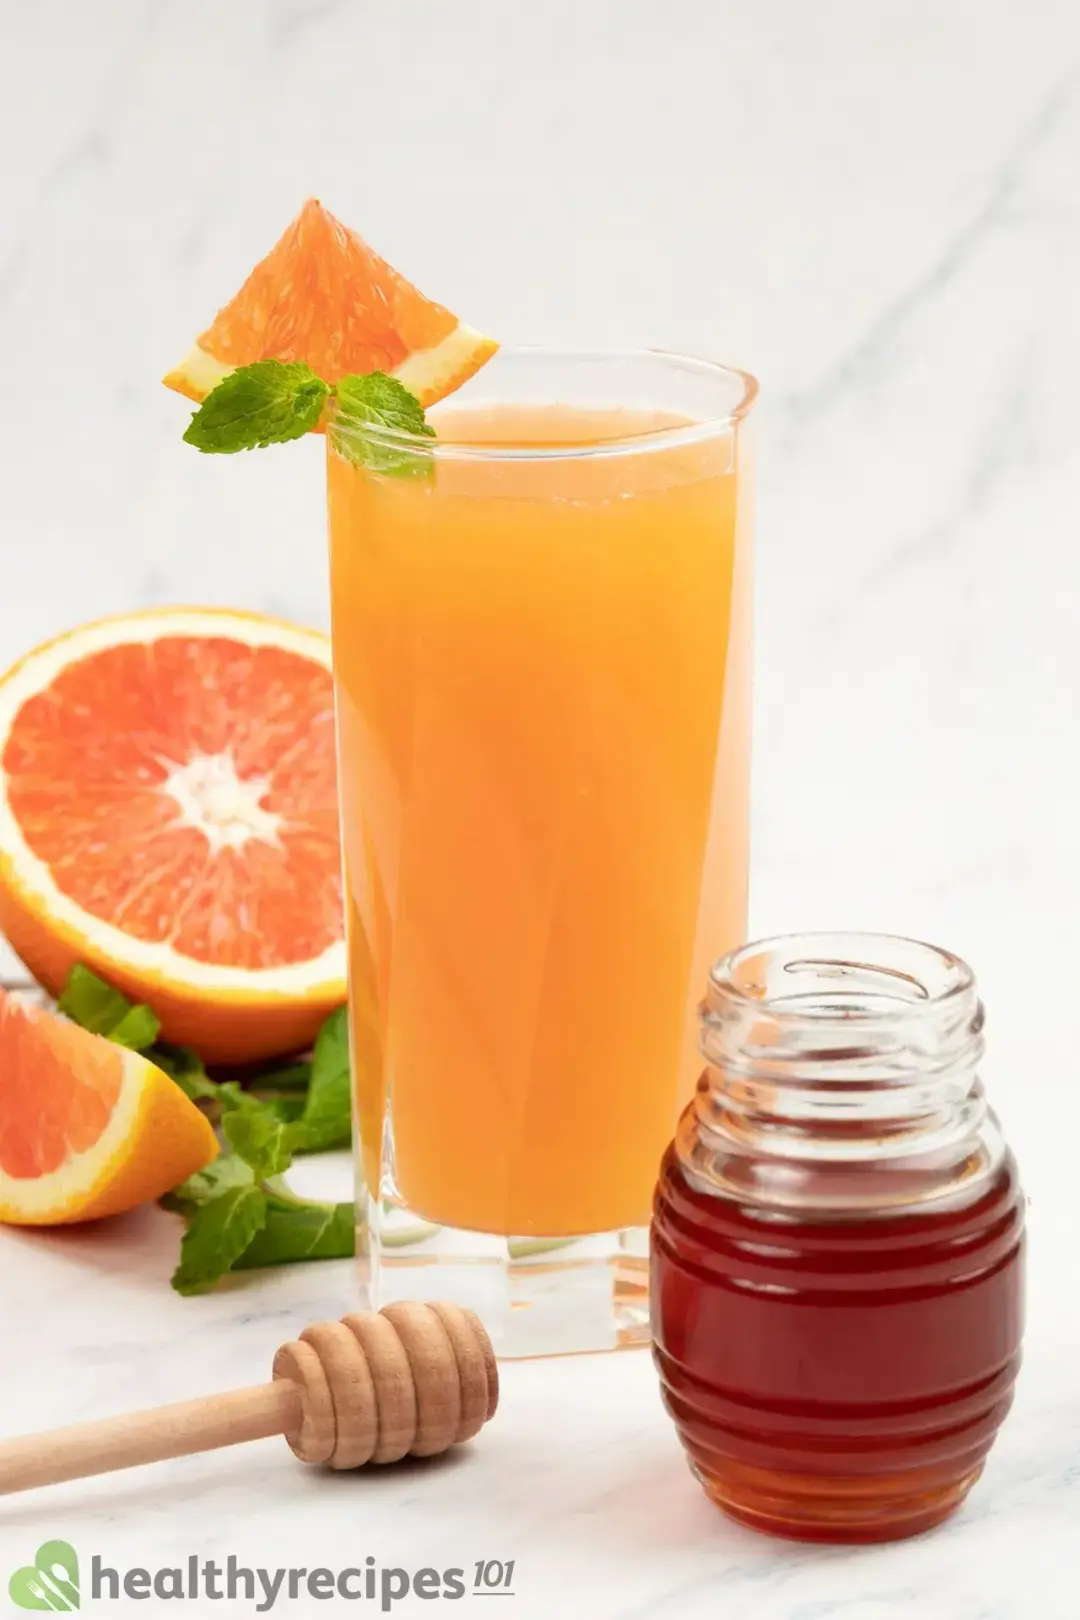 A glass of grapefruit juice garnished with mints, next to half of a grapefruit and a honey jar